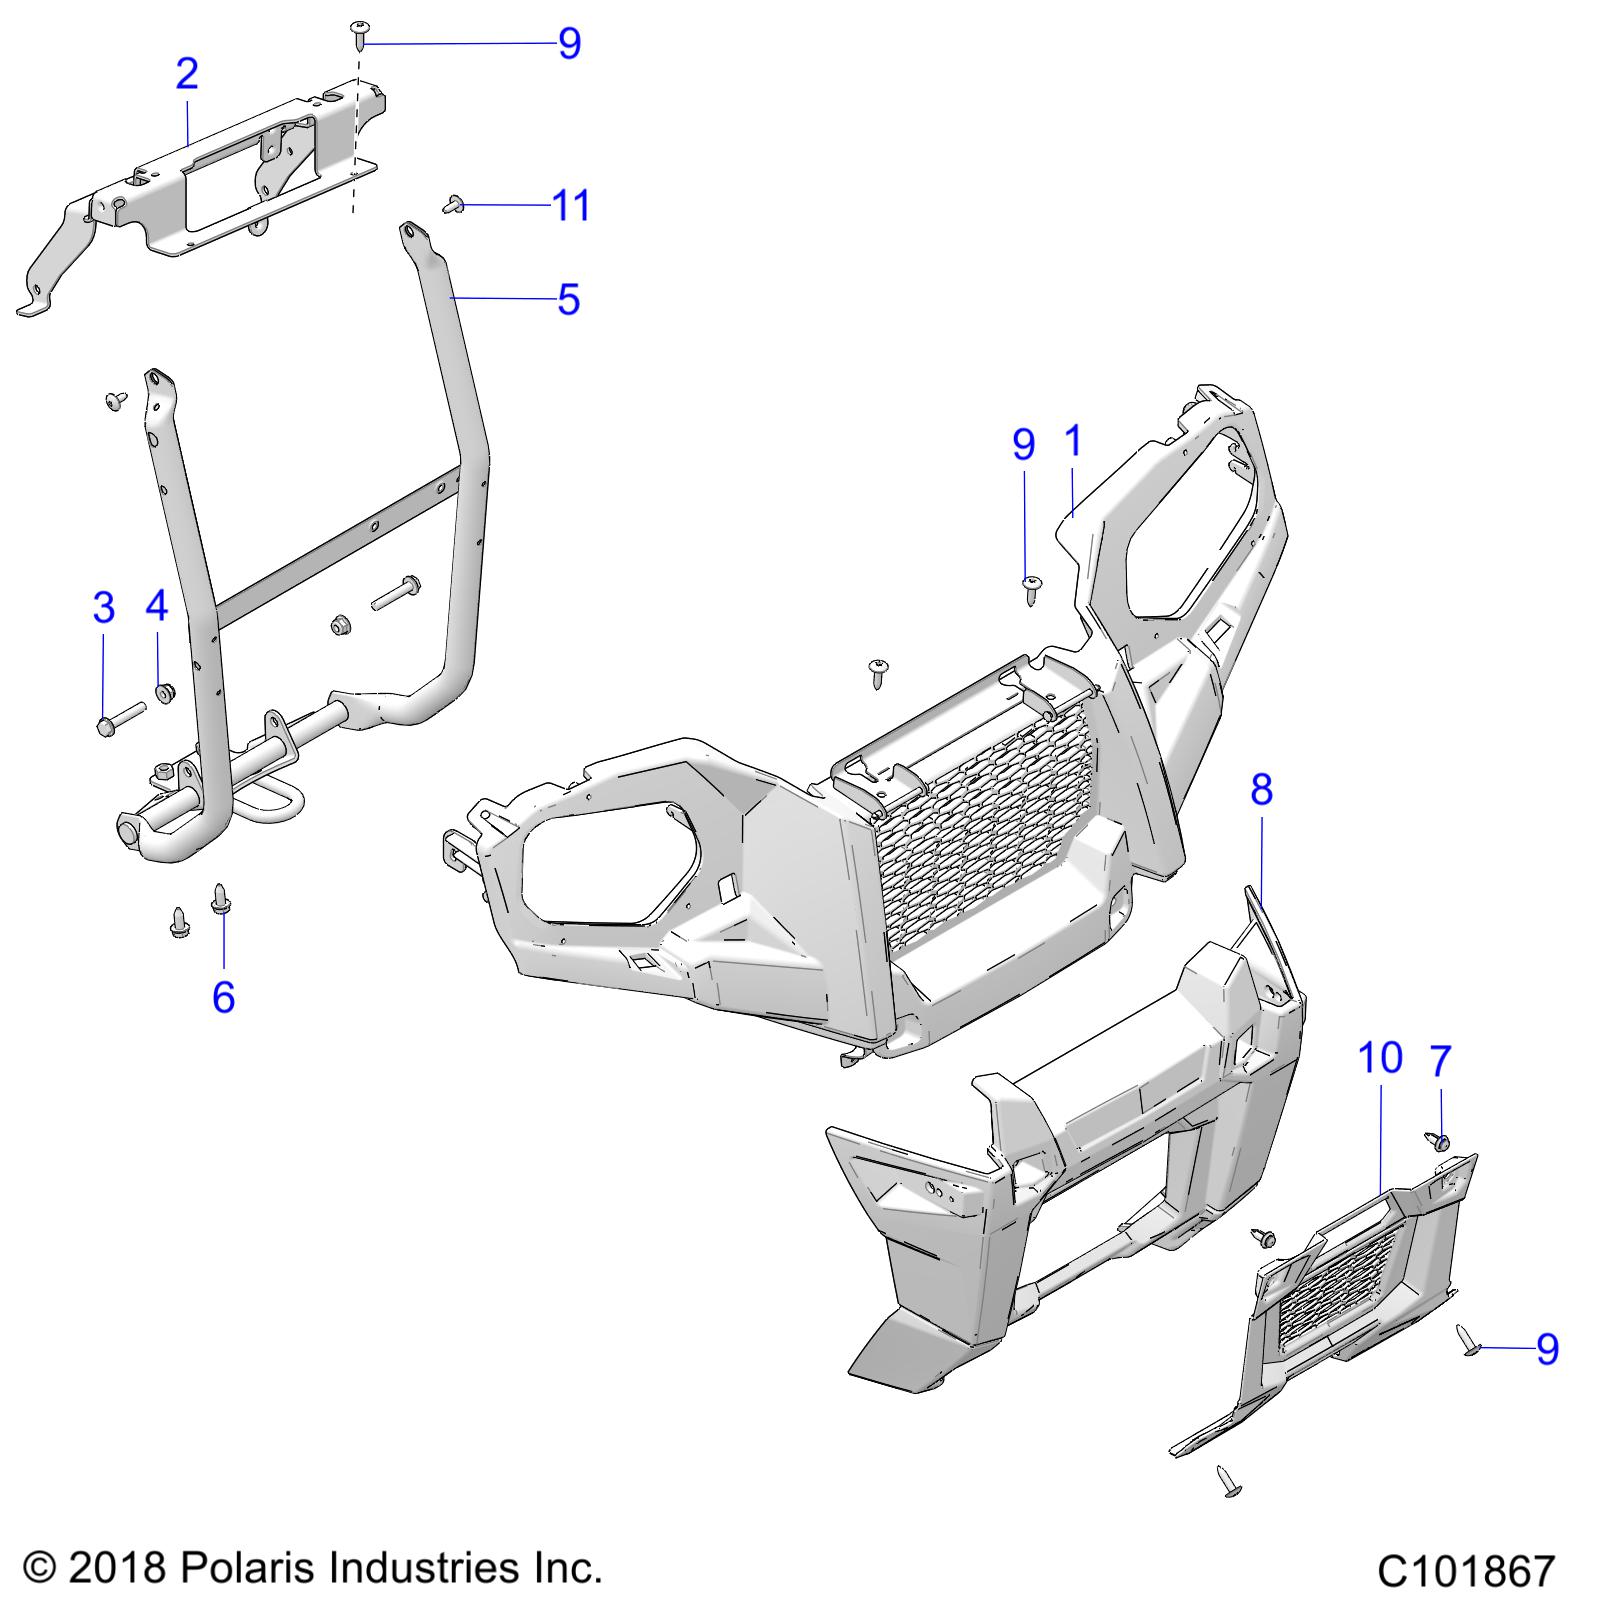 BODY, FRONT BUMPER and MOUNTING - A19SDS57C5 (C101867)